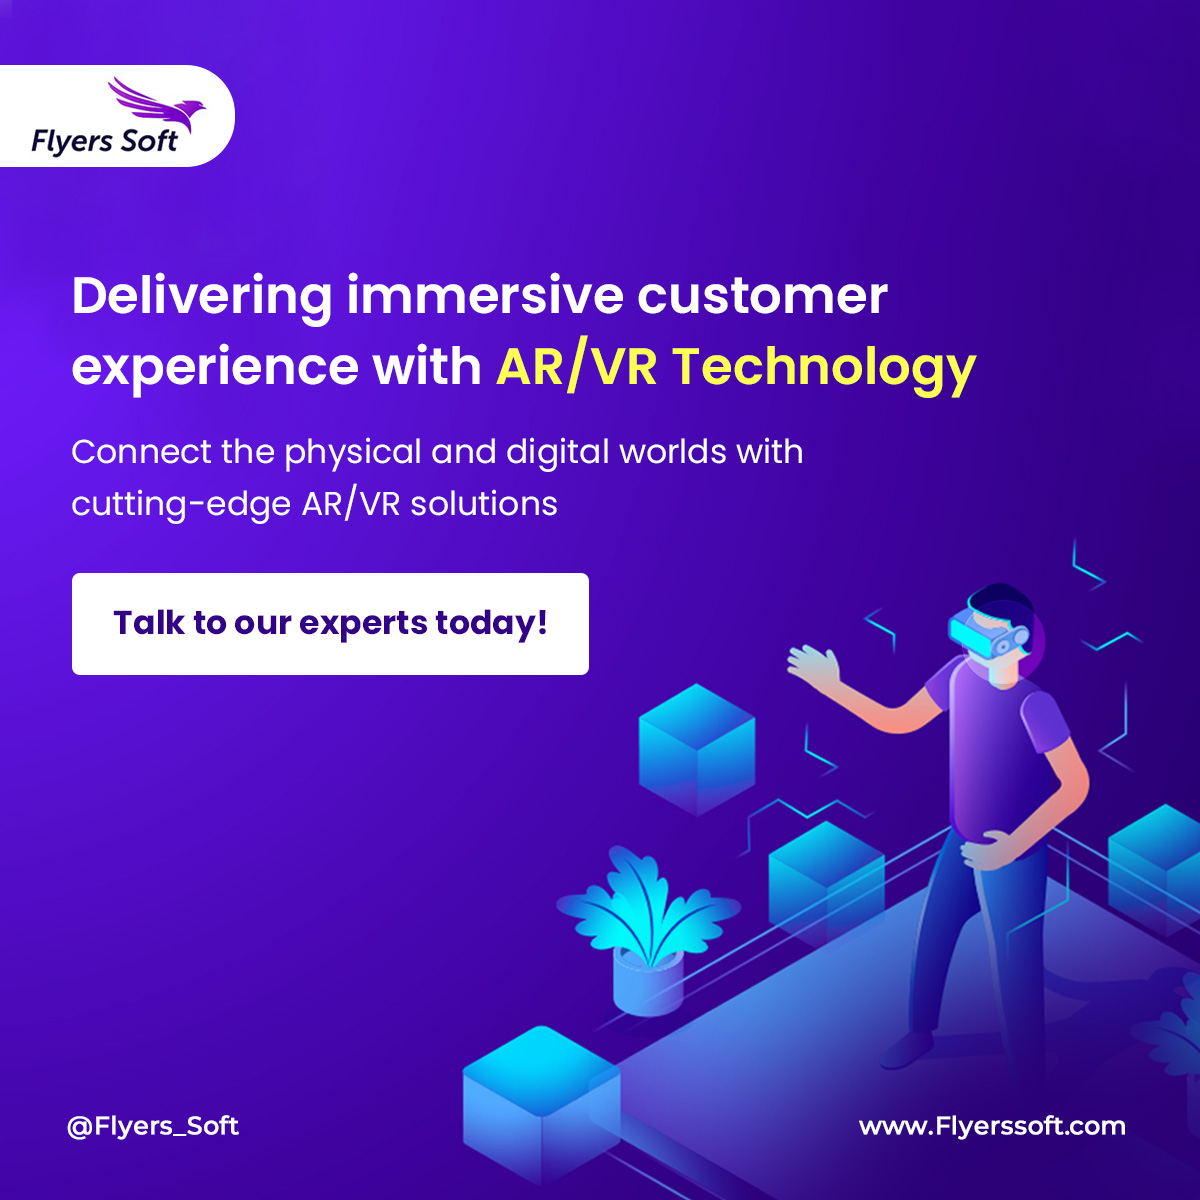 Immerse your customers in a new reality with our #AR #VR solutions!

✨Experience the seamless blend of physical and digital worlds that will captivate your audience. 

#flyerssoft #immersivetechnology #innovation #arvr #trendingtechnology #trendingnews #futuretech #technology